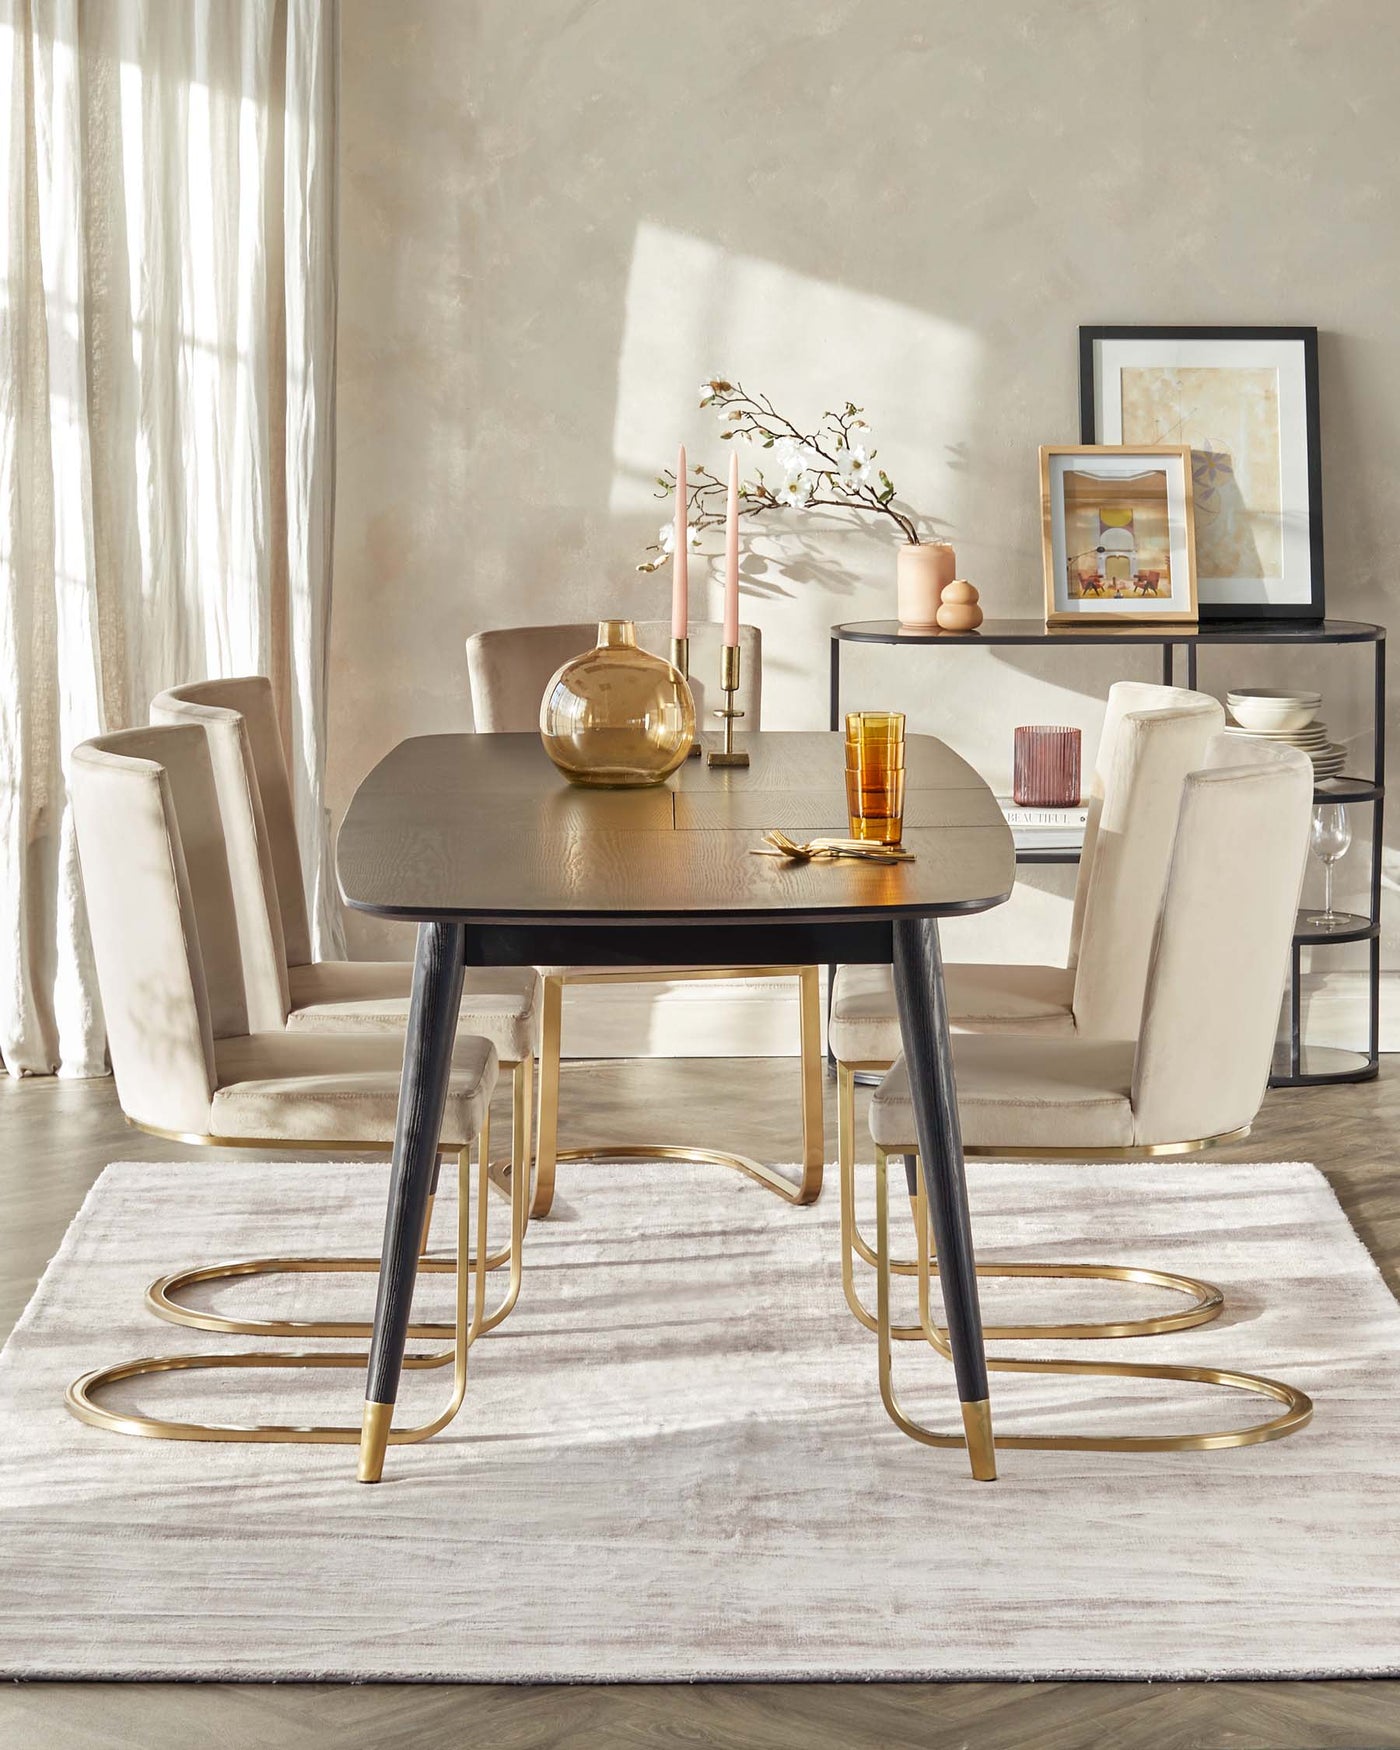 A contemporary dining room setup featuring a round, dark wood table with a fluted design and elegant brass-coloured metal legs. Four matching modern chairs with cream upholstery and brass legs are arranged around the table. The table and chairs are set on a white textured area rug. A coordinating console table with a metal frame and a glass top displays decorative items and is placed against the wall.